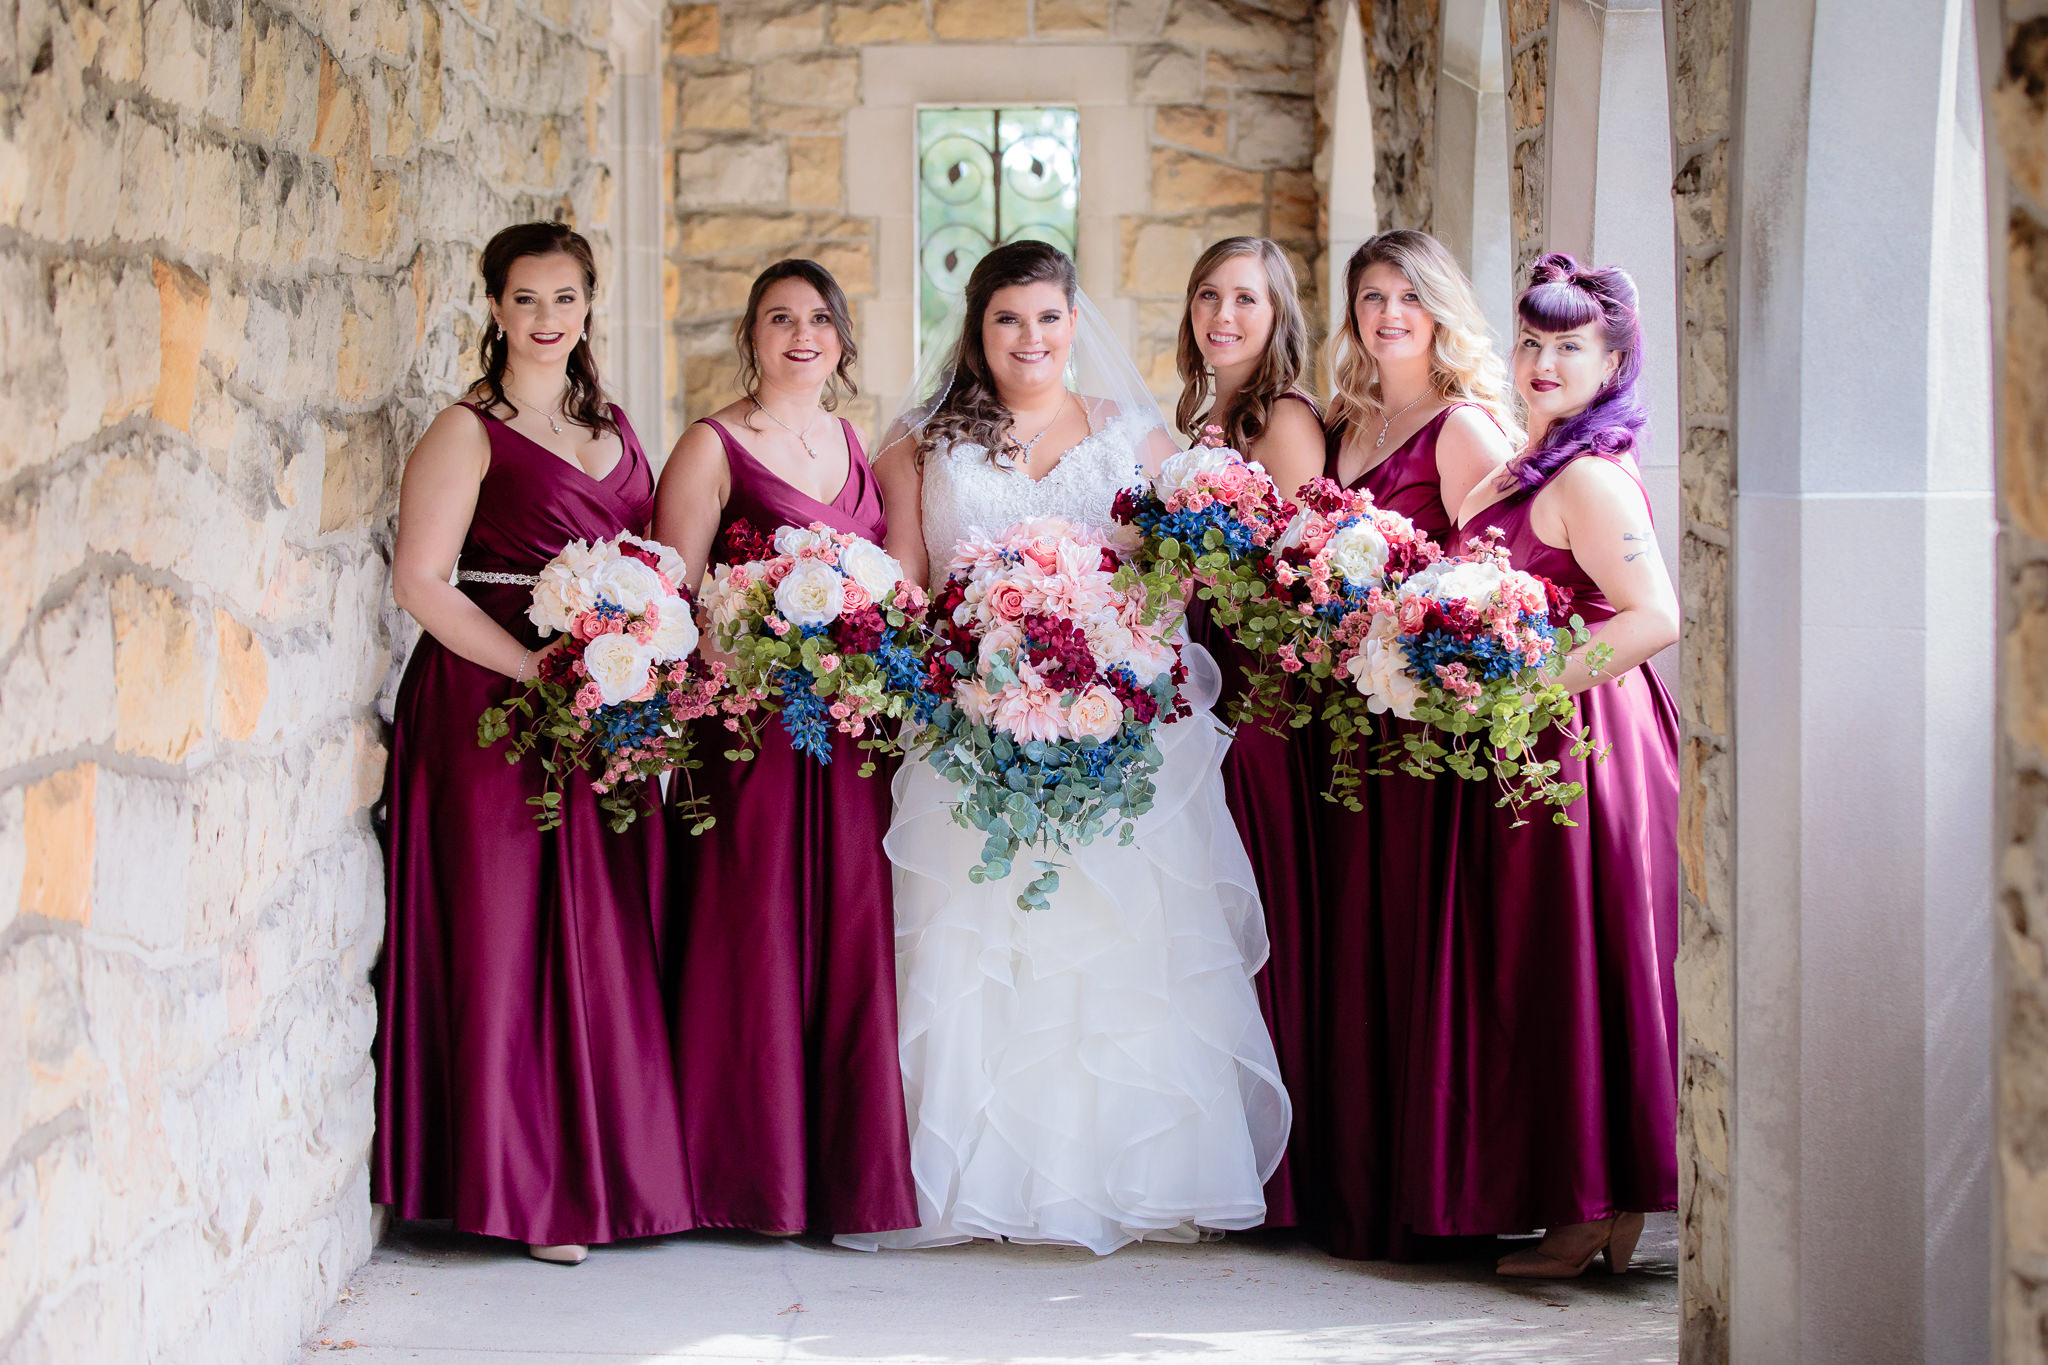 The bridal party and their DIY bouquets which were done by the bride, outside the Mt. Lebanon United Methodist Church